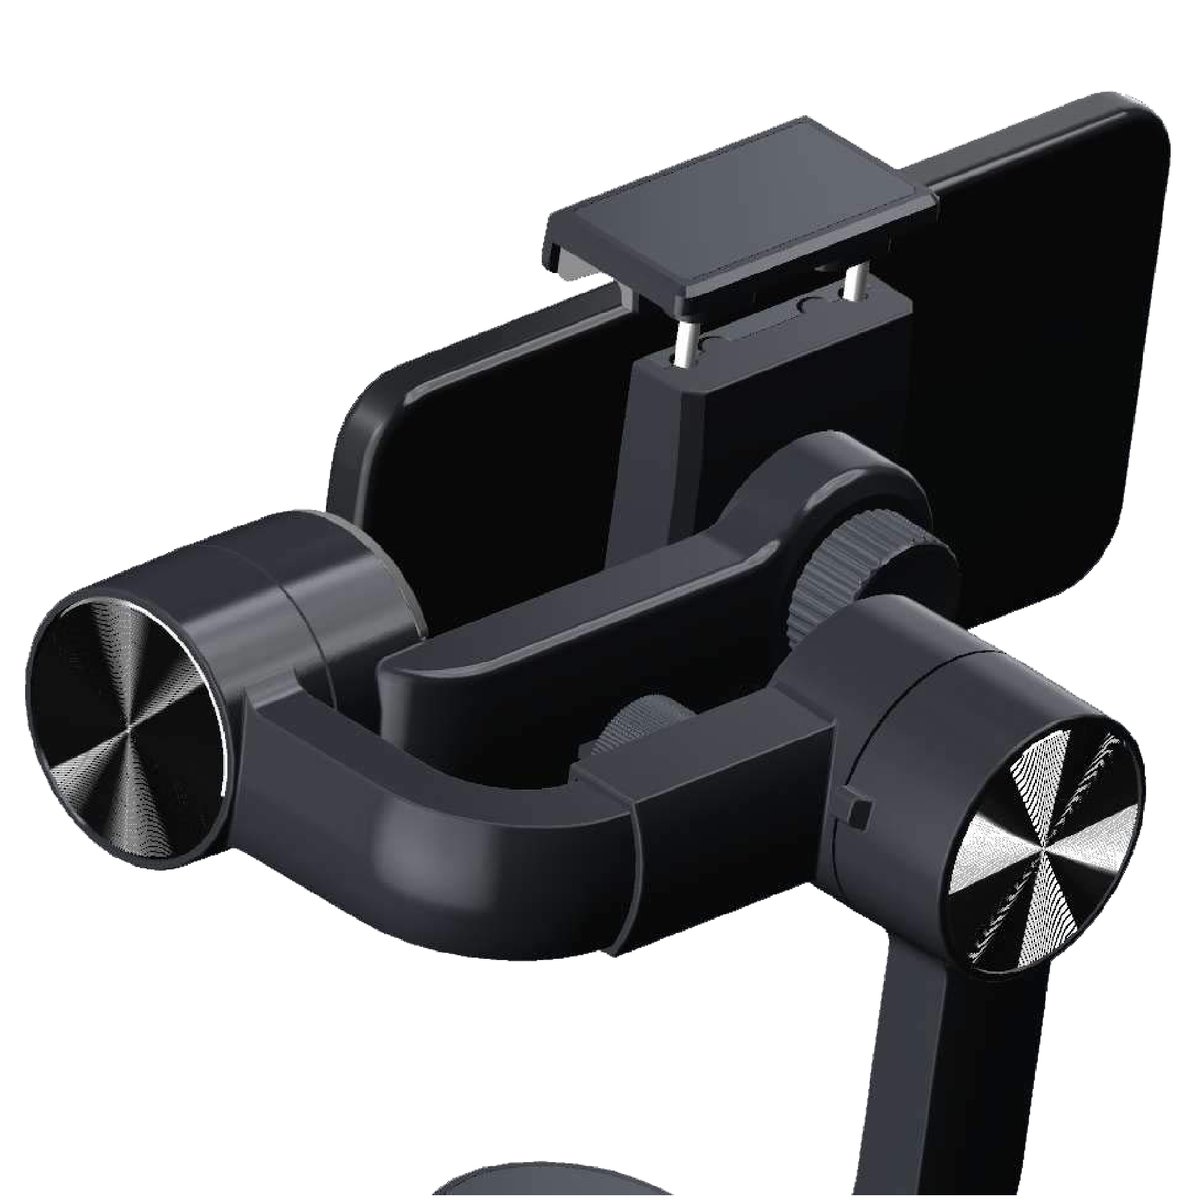 PNY Mobile Gimbal MOBEE P-G4000 Gimbal Stabilizer for Smartphone, GoPro